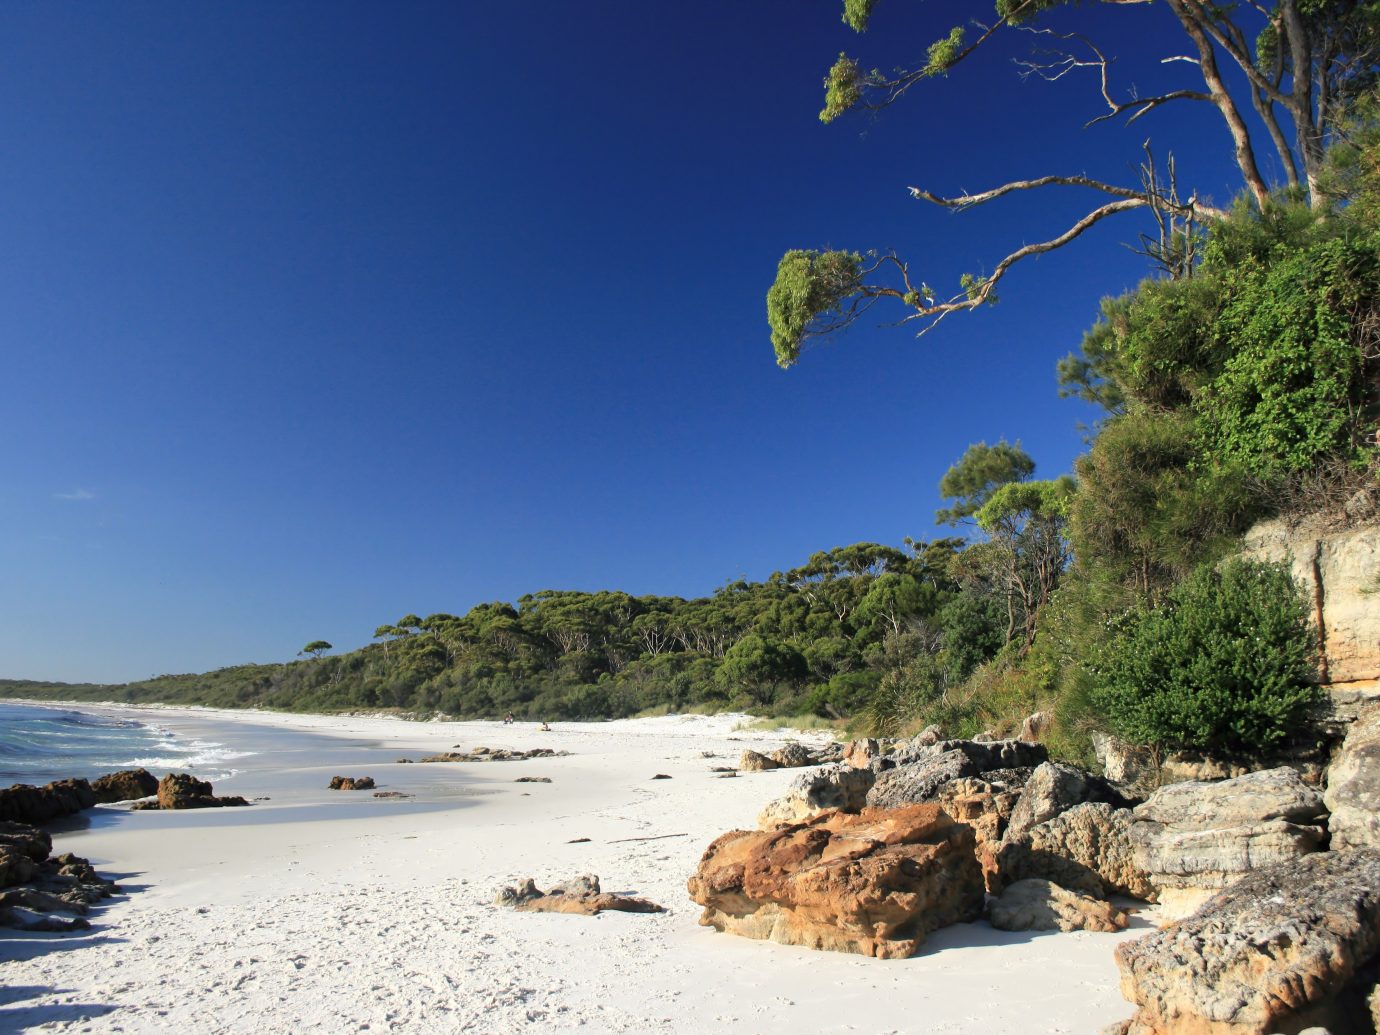 One of the beautiful beaches in Jarvis bay,NSW,Australia